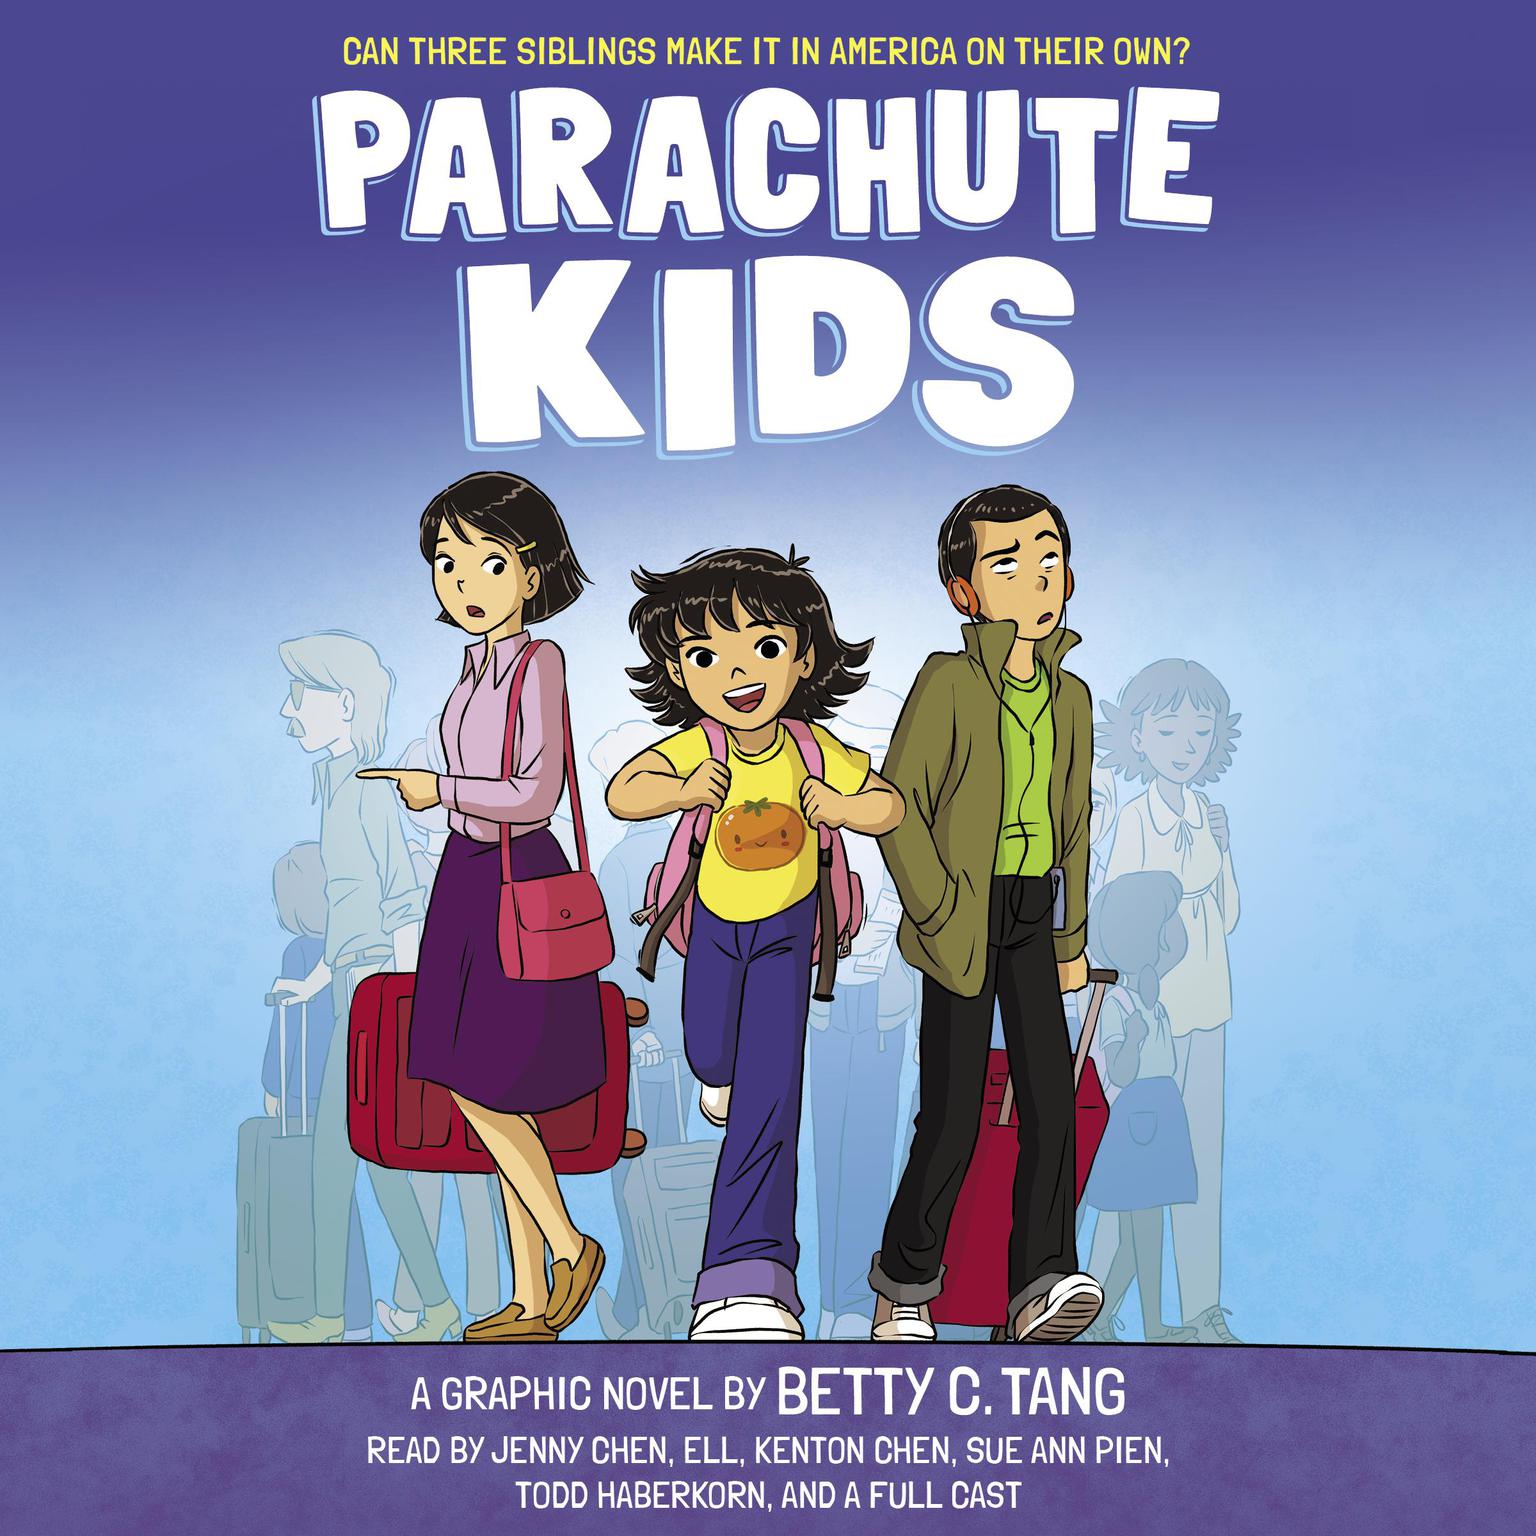 Parachute Kids: A Graphic Novel Audiobook, by Betty C. Tang